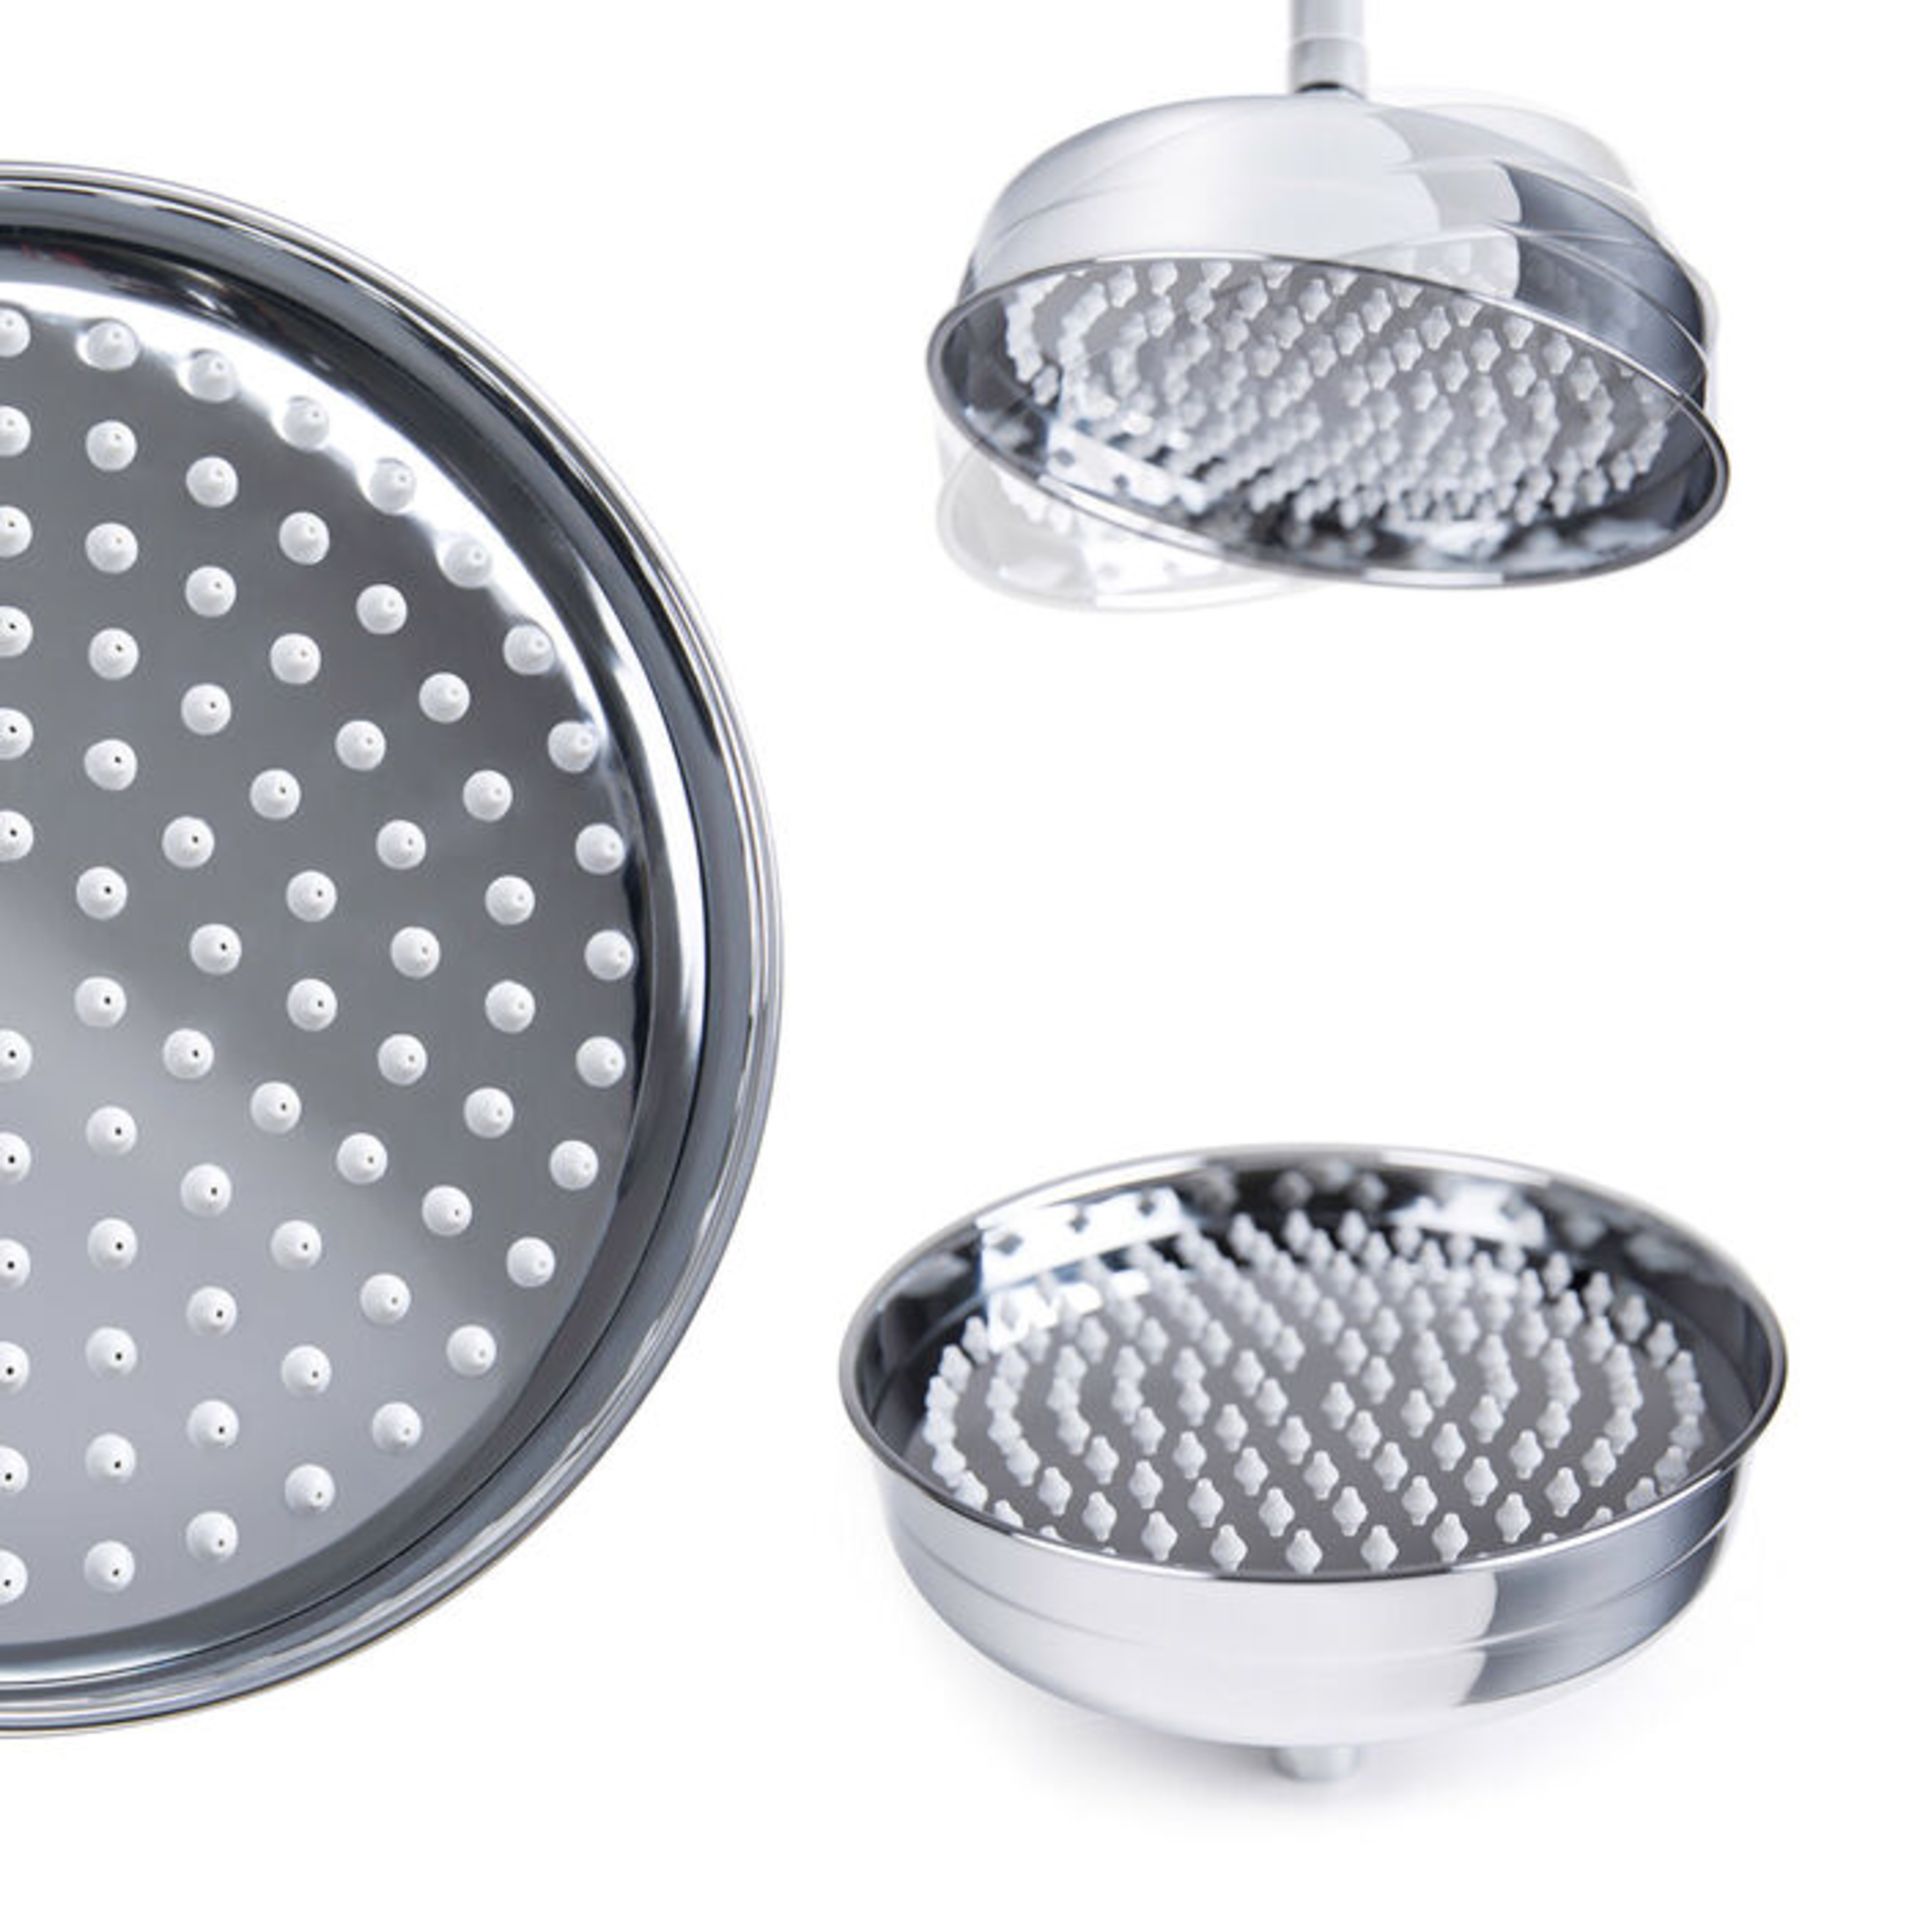 (NV1029) Stainless Steel 205mm Traditional Round Shower Head.. Finished in high quality polishe...